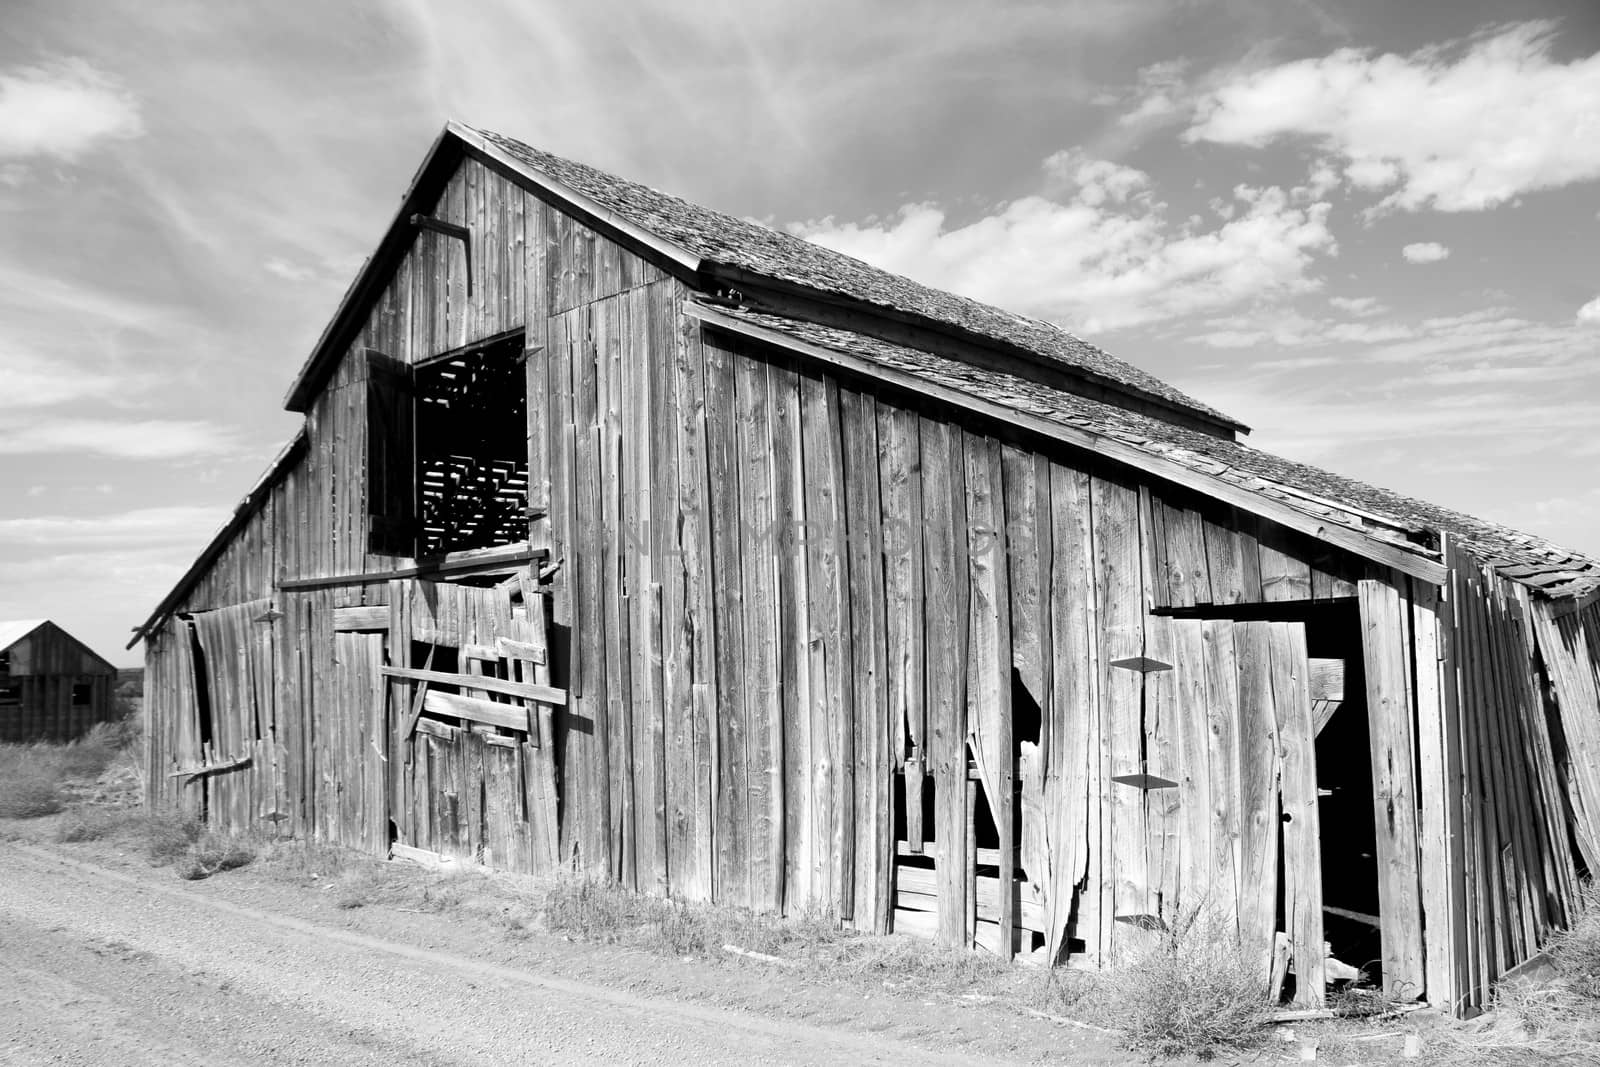 Weathered barn in the Panhandle region of Idaho in black and white with puffy clouds